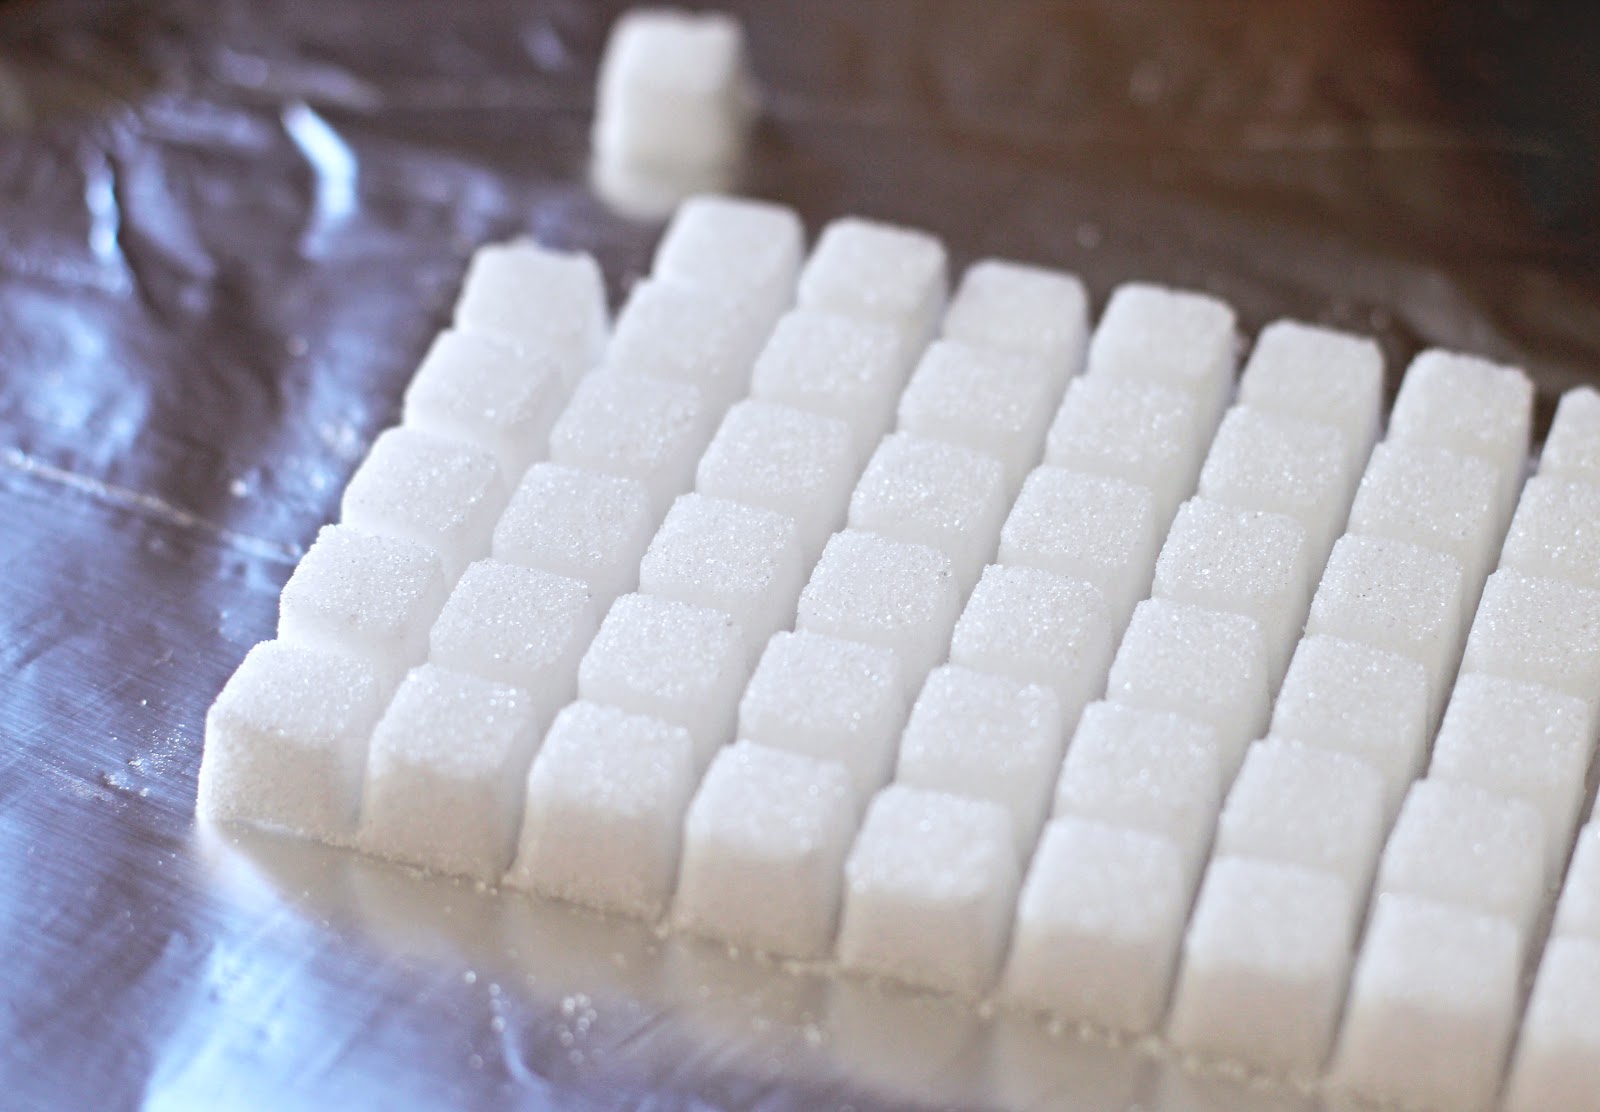 These Healthy Homemade Sugar Cubes taste just like the storebought ones except this recipe is low calorie, low carb, sugar free, fat free, gluten free and vegan! -- Healthy Dessert Recipes at the Desserts With Benefits Blog